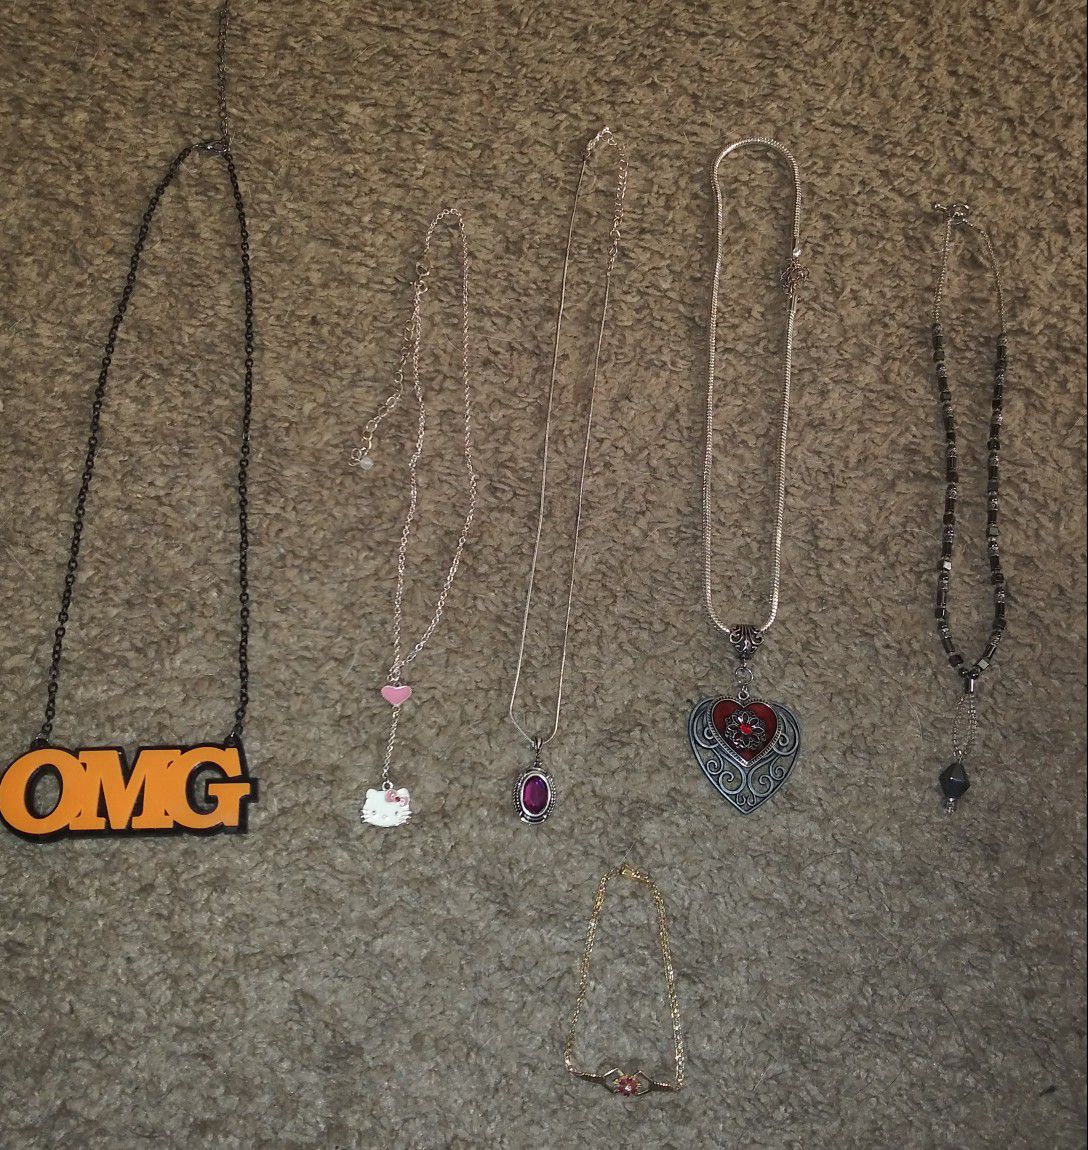 Necklaces and one bracelet